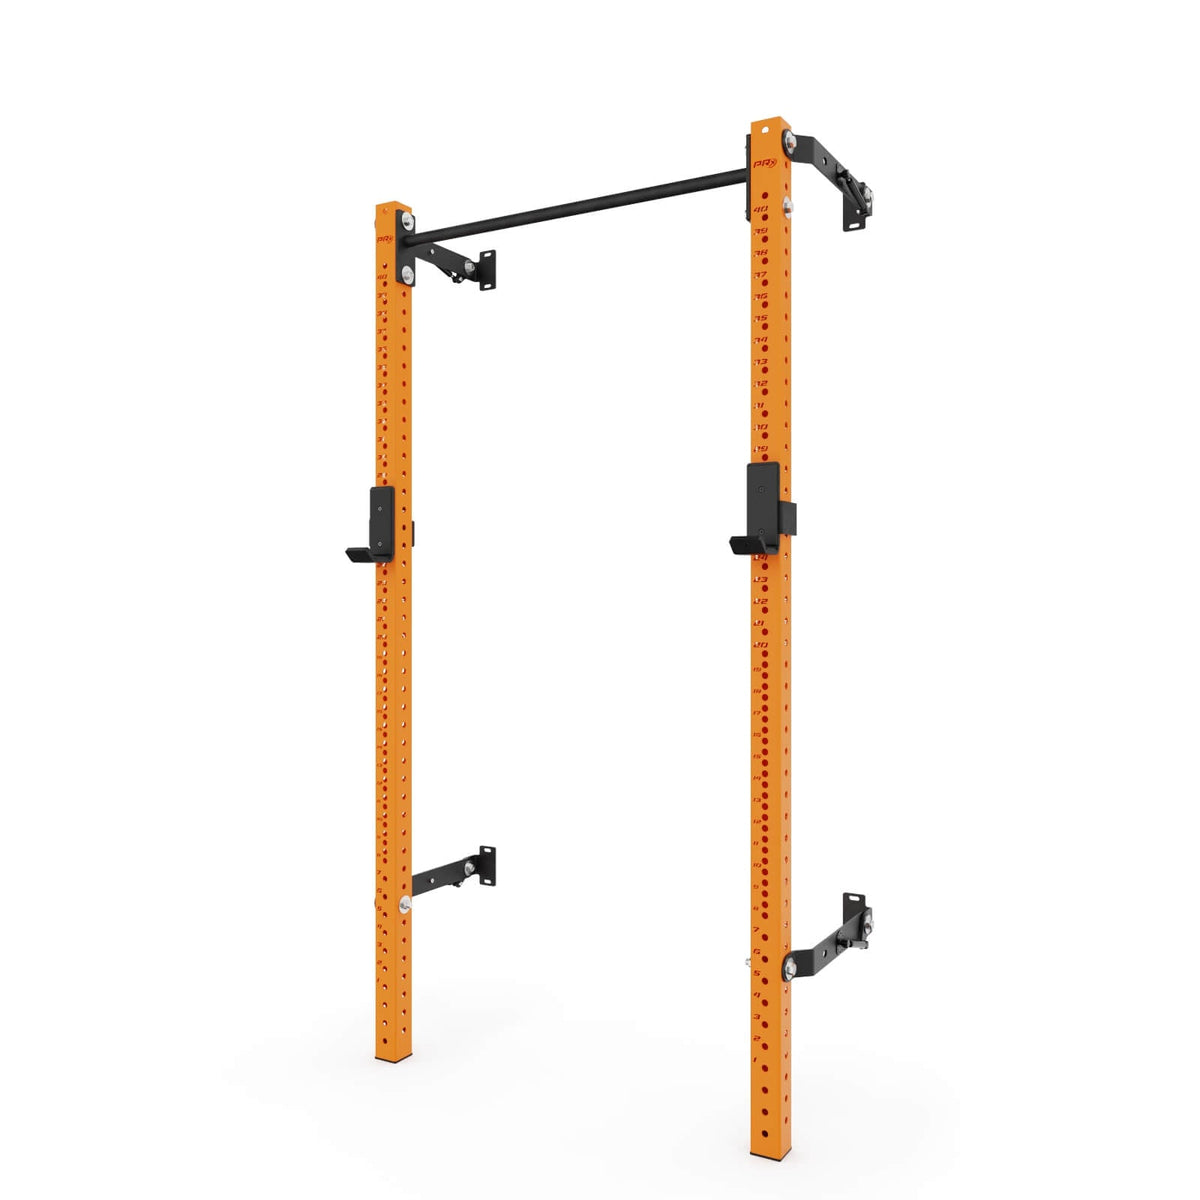 High Squat Rack With Pull-Up Bar - Torque Fitness